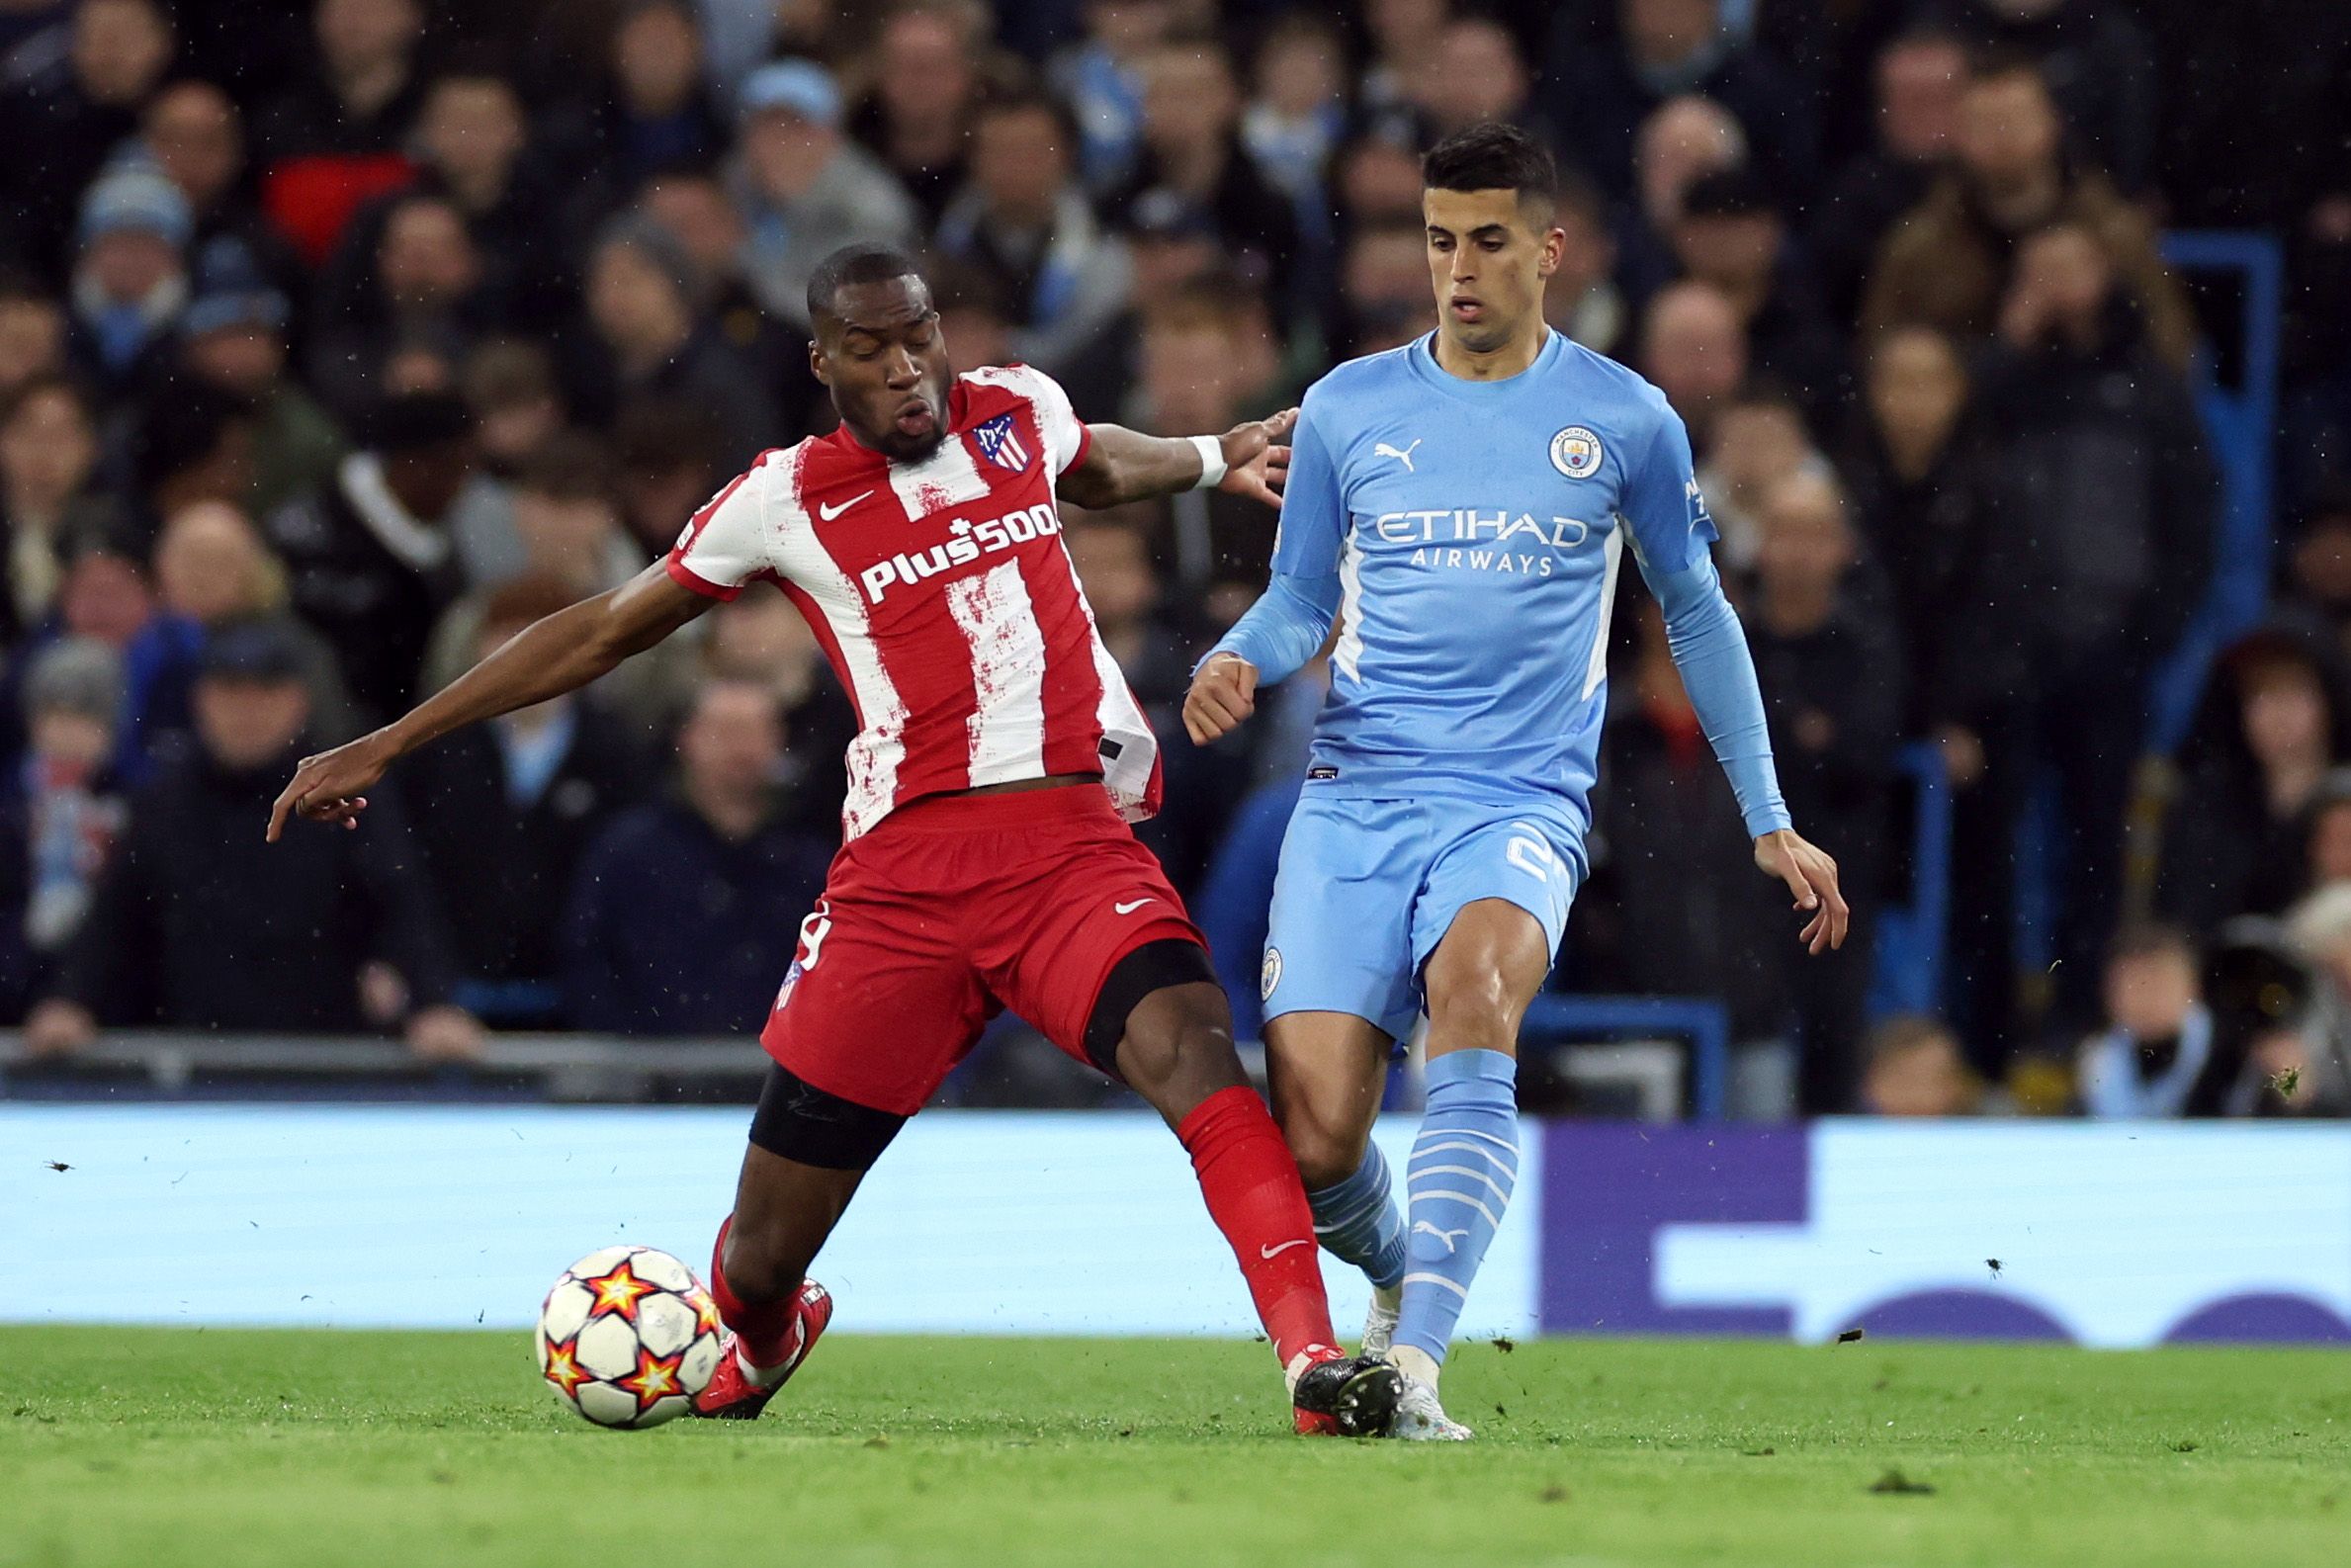 Soccer Football - Champions League - Quarter-Final - First Leg - Manchester City v Atletico Madrid - Etihad Stadium, Manchester, Britain - April 5, 2022 Manchester City's Joao Cancelo in action with Atletico Madrid's Geoffrey Kondogbia REUTERS/Phil Noble